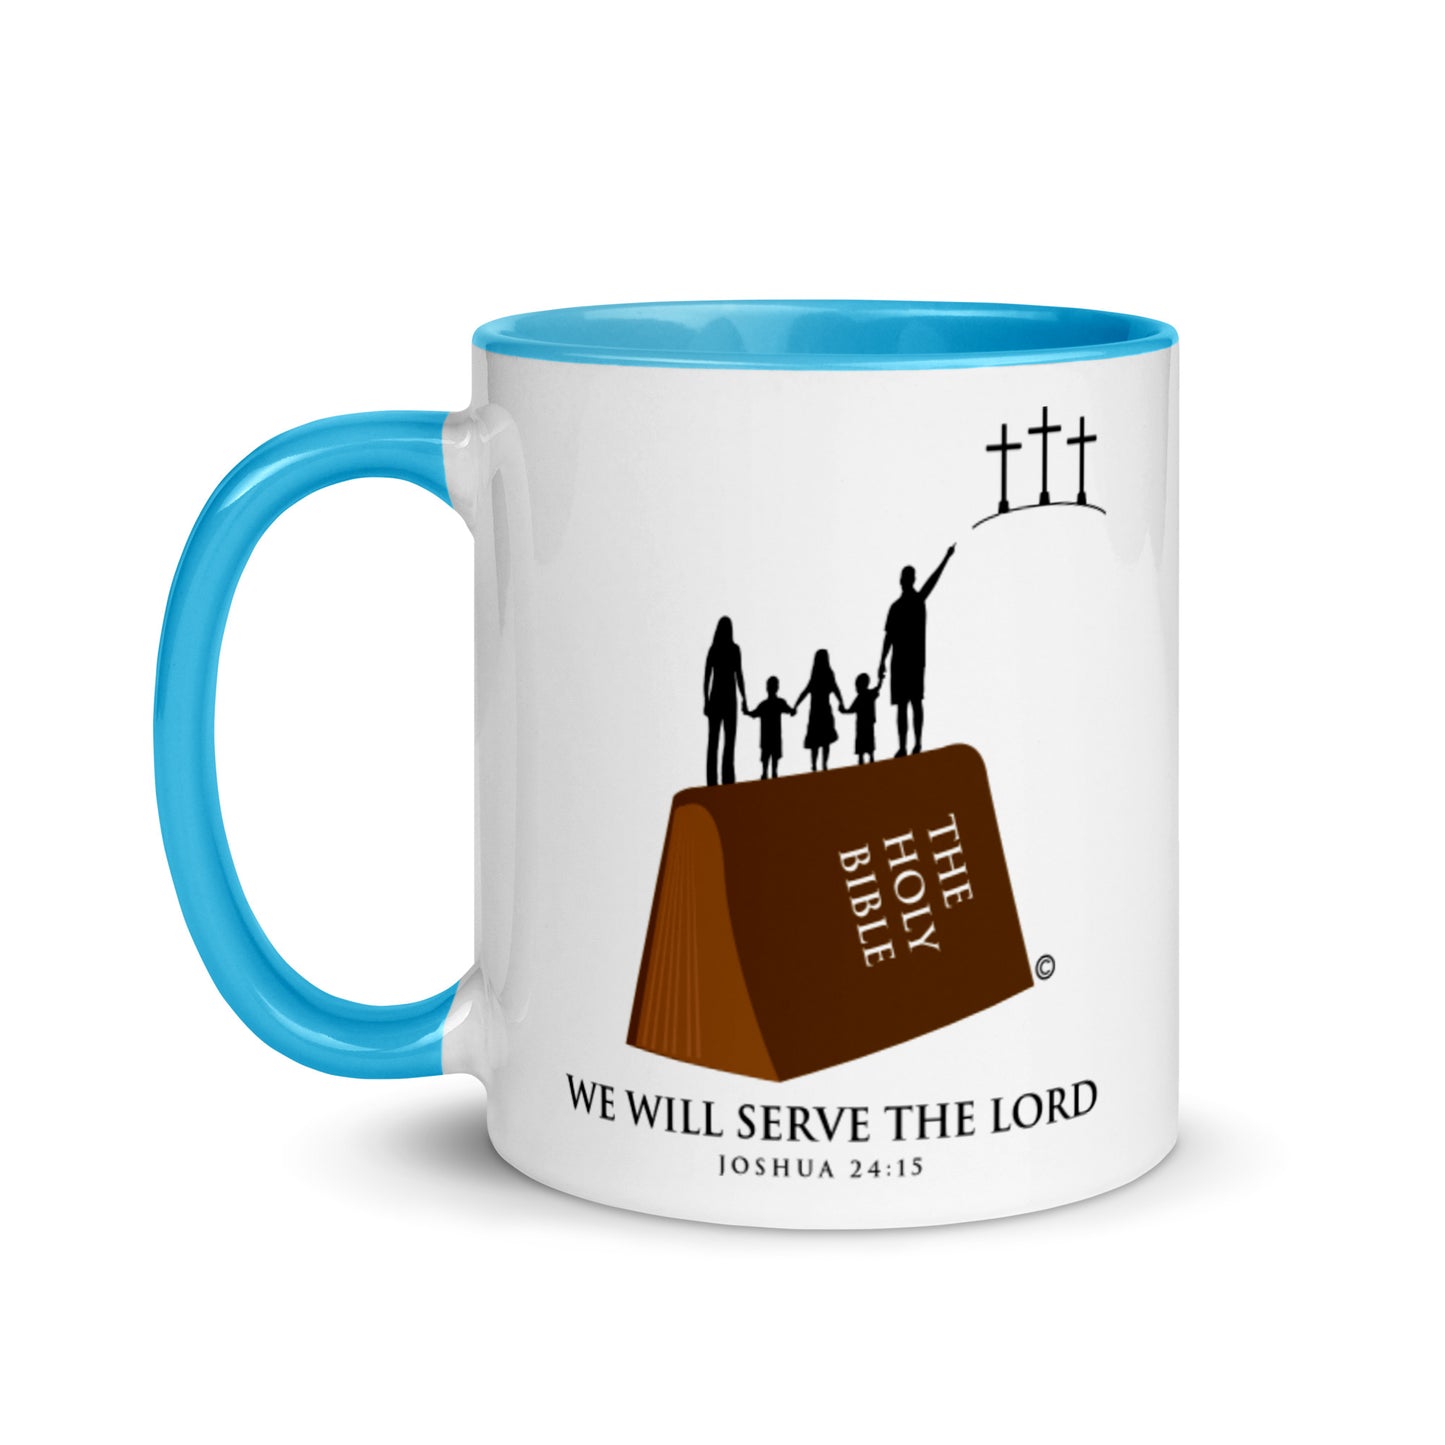 We Will Serve the Lord Mug with Color Inside